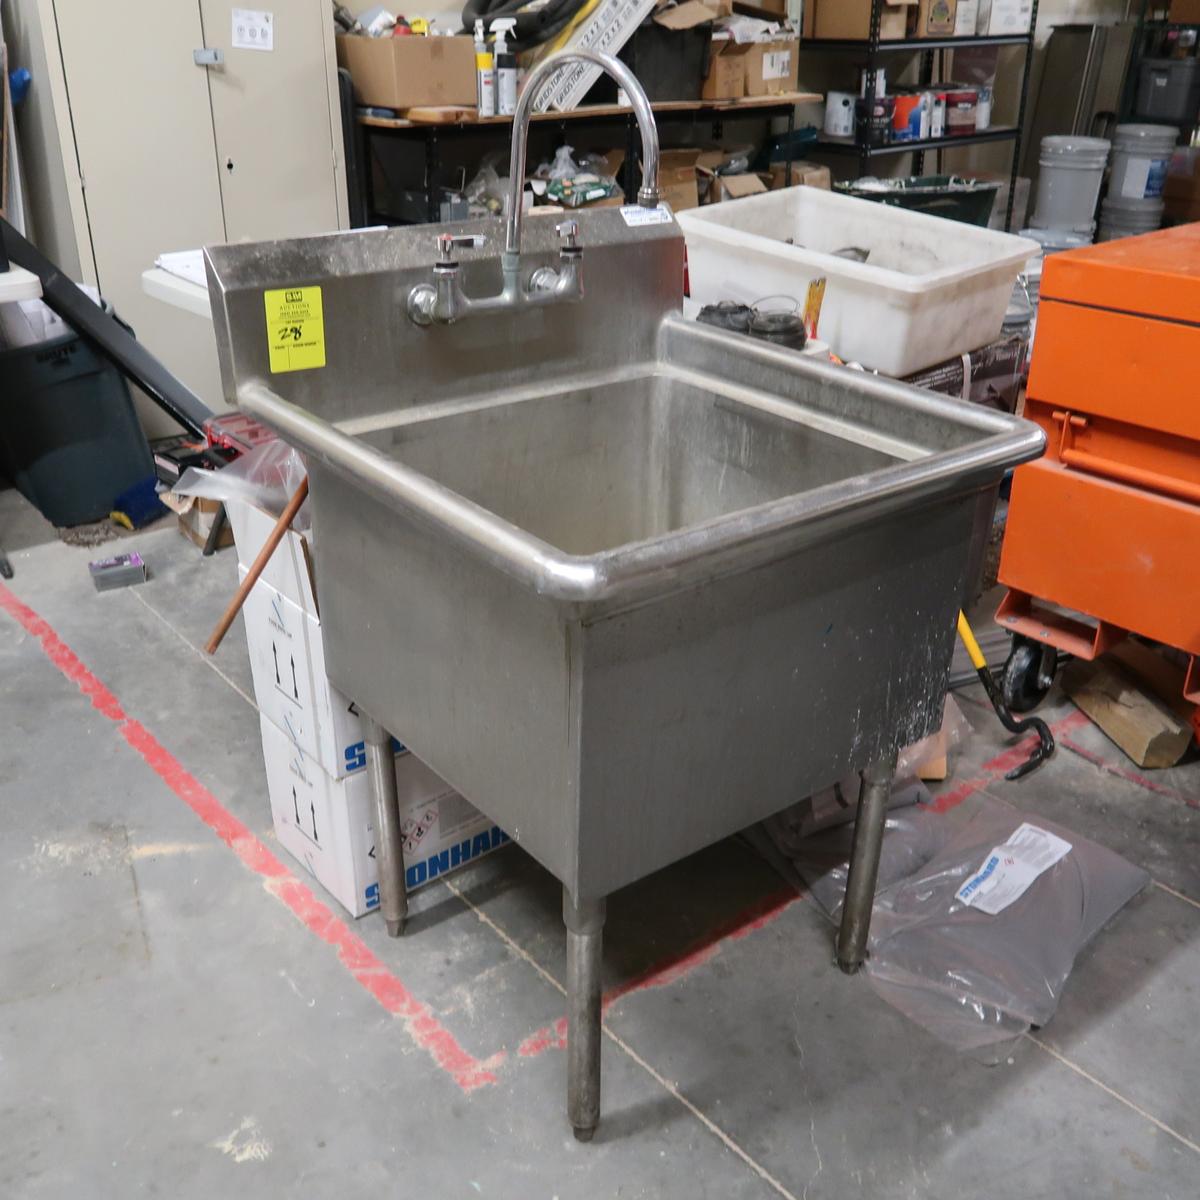 single compartment sink, on legs